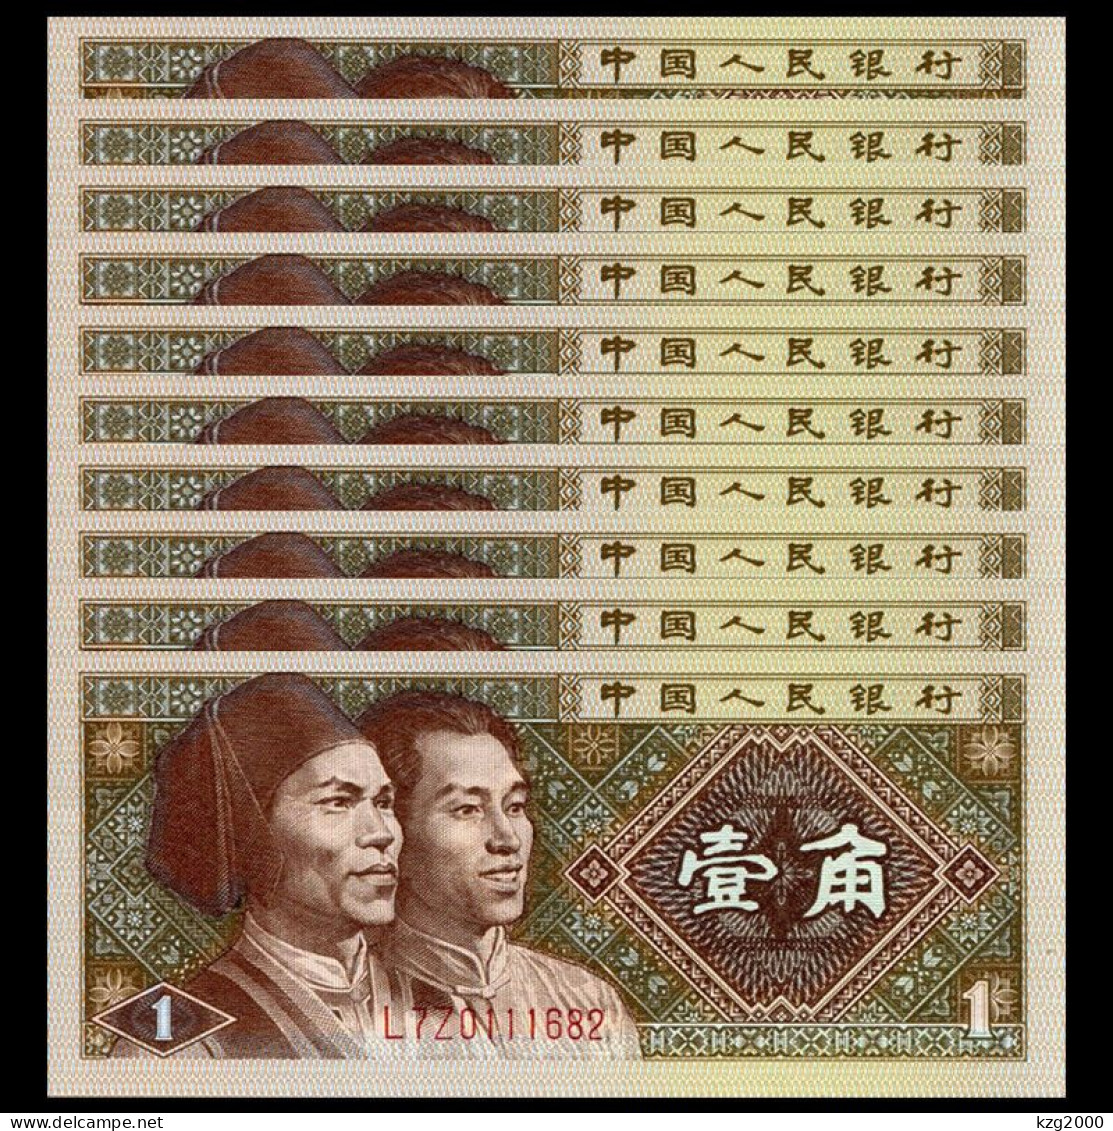 China 1980 Paper Money Banknotes 4th Edition 1Jiao  Banknote UNC 10Pcs  Continuous Number 01-10 - Chine